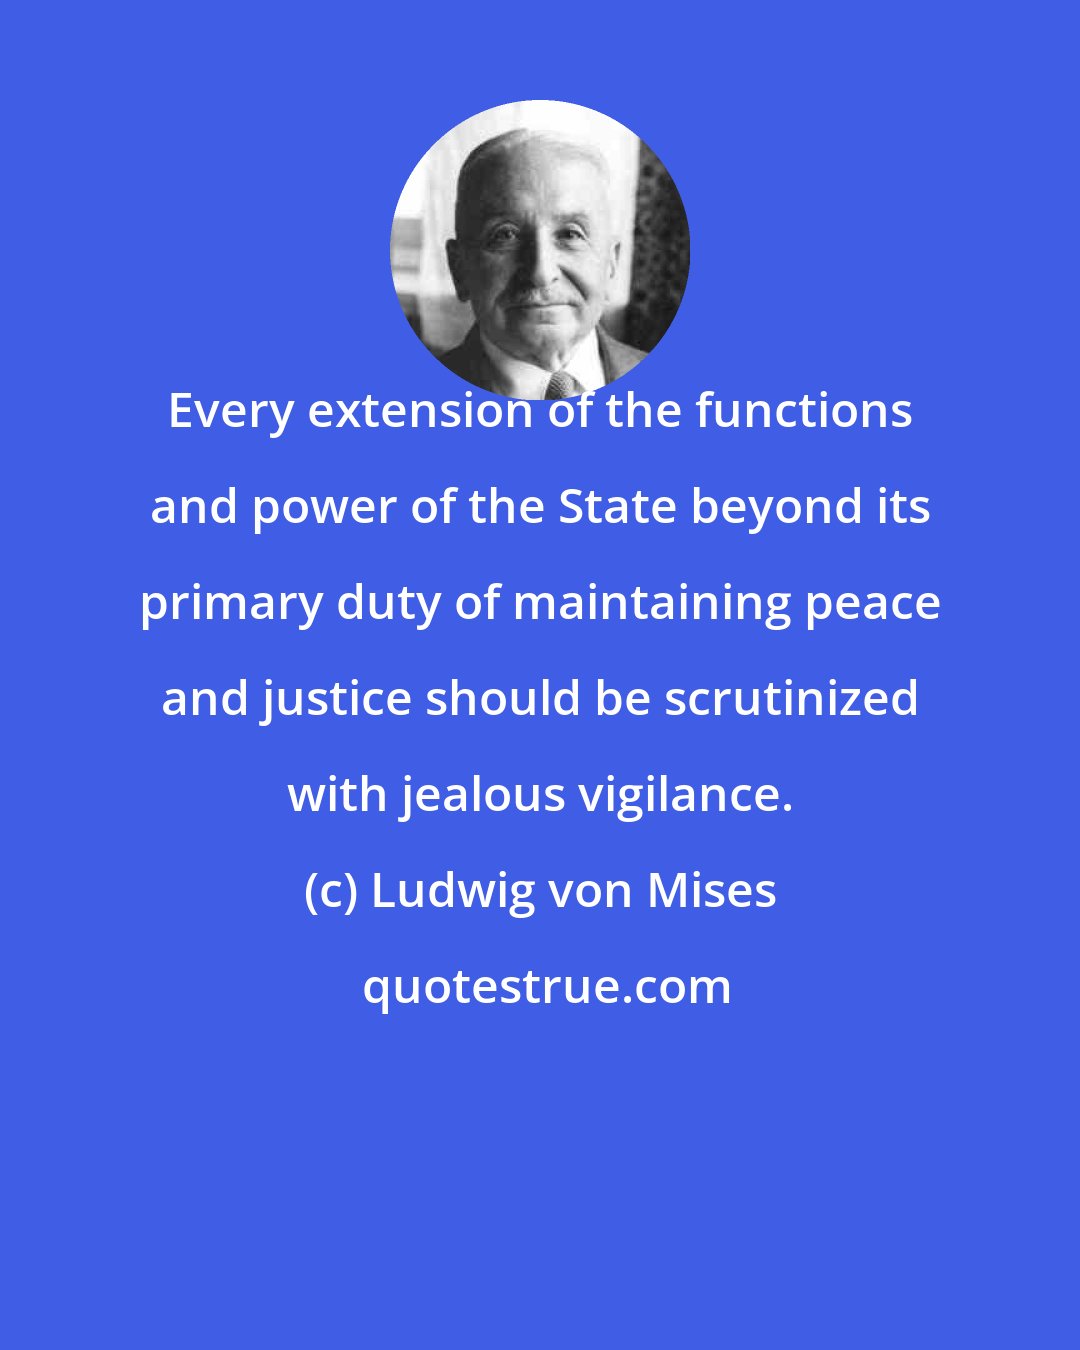 Ludwig von Mises: Every extension of the functions and power of the State beyond its primary duty of maintaining peace and justice should be scrutinized with jealous vigilance.